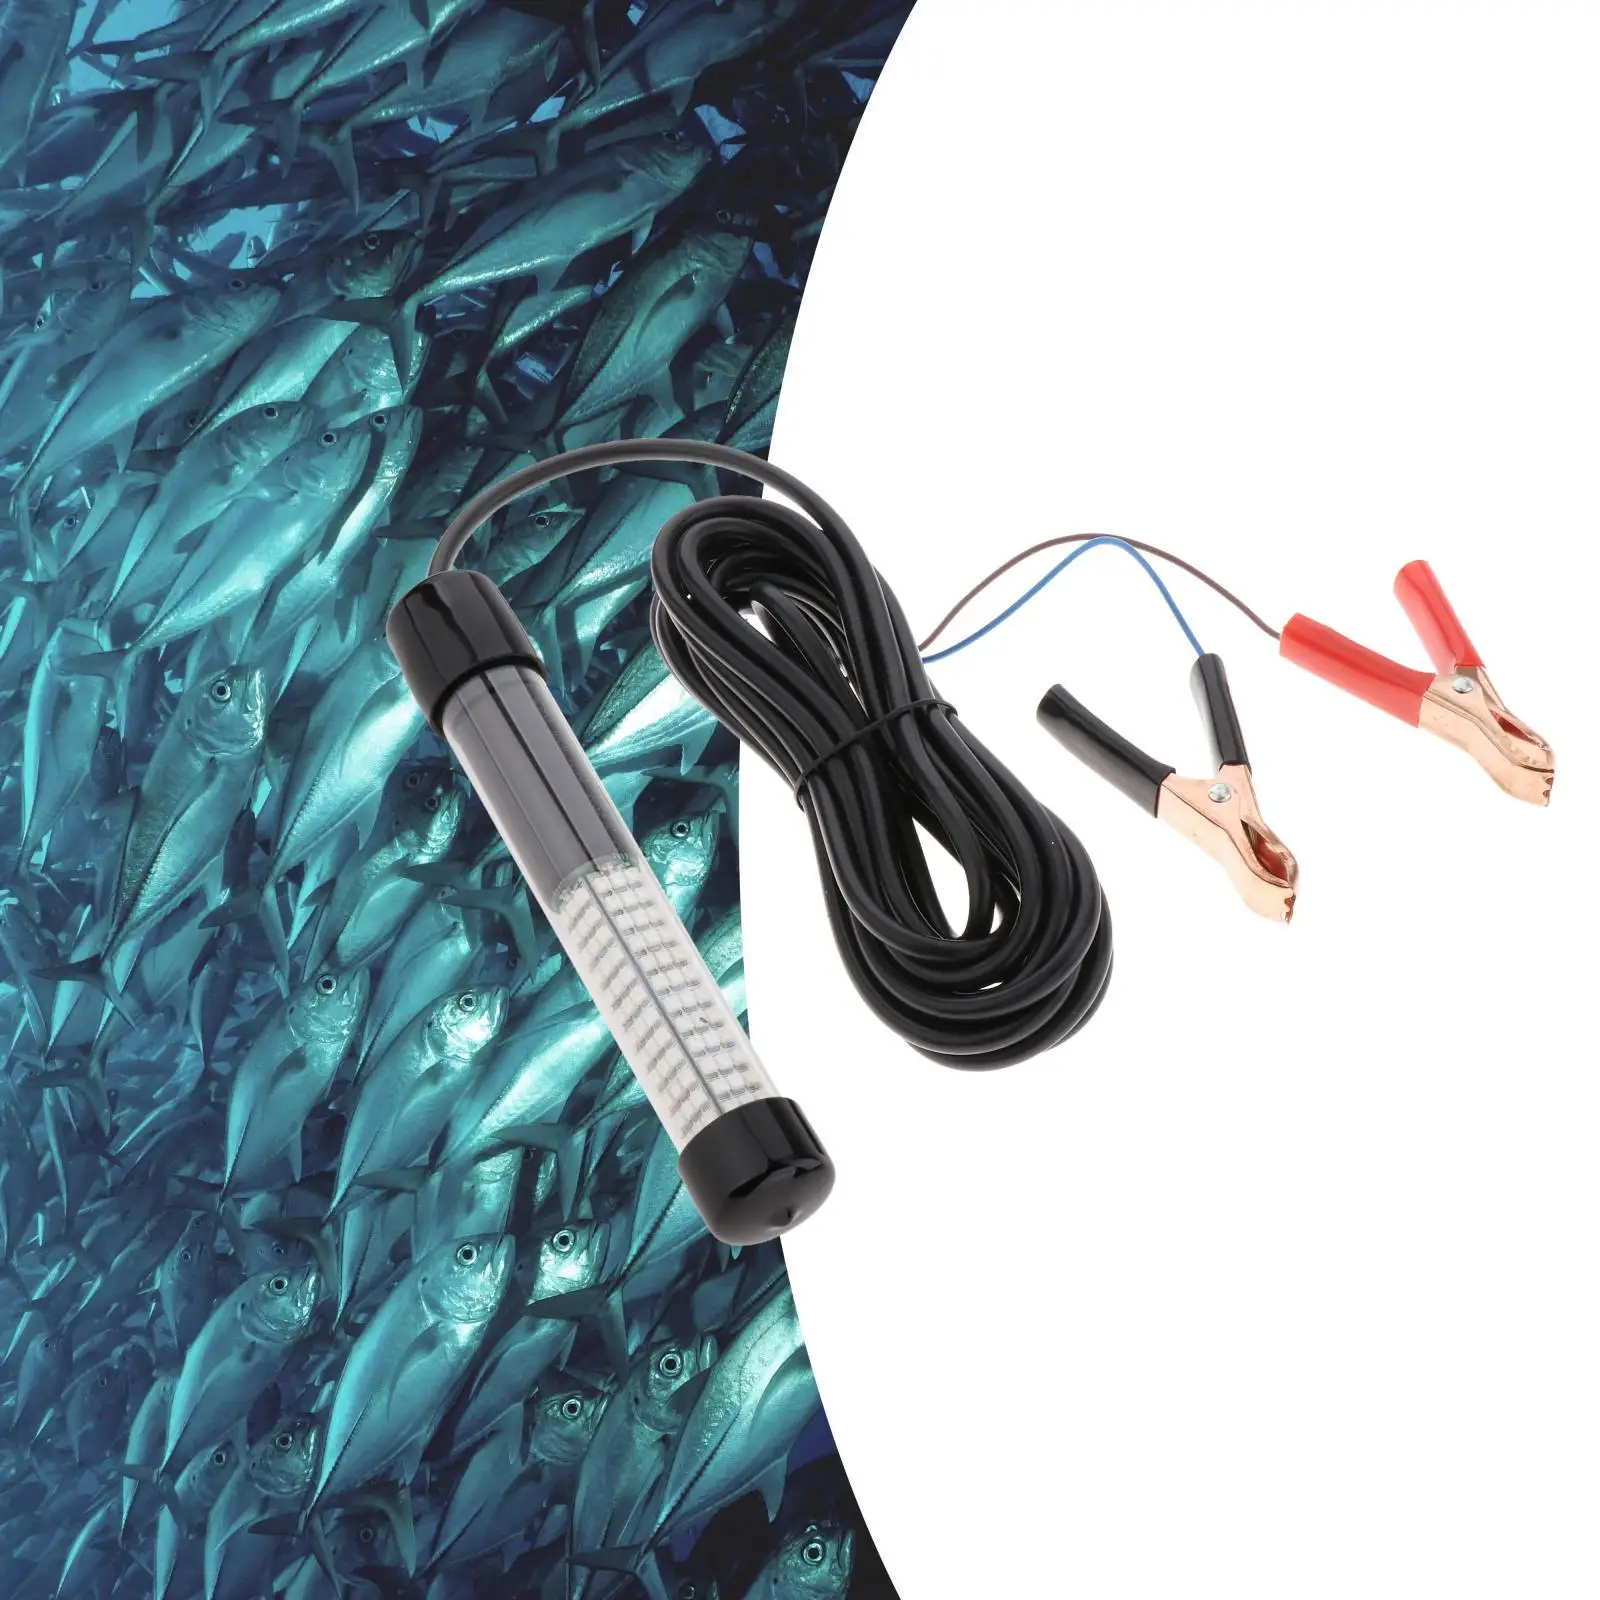 LED Submersible Fishing Light with 5M Cord Clip Portable Waterproof 12V Outdoor Underwater Fishing Light Crappie for Ice Fishing